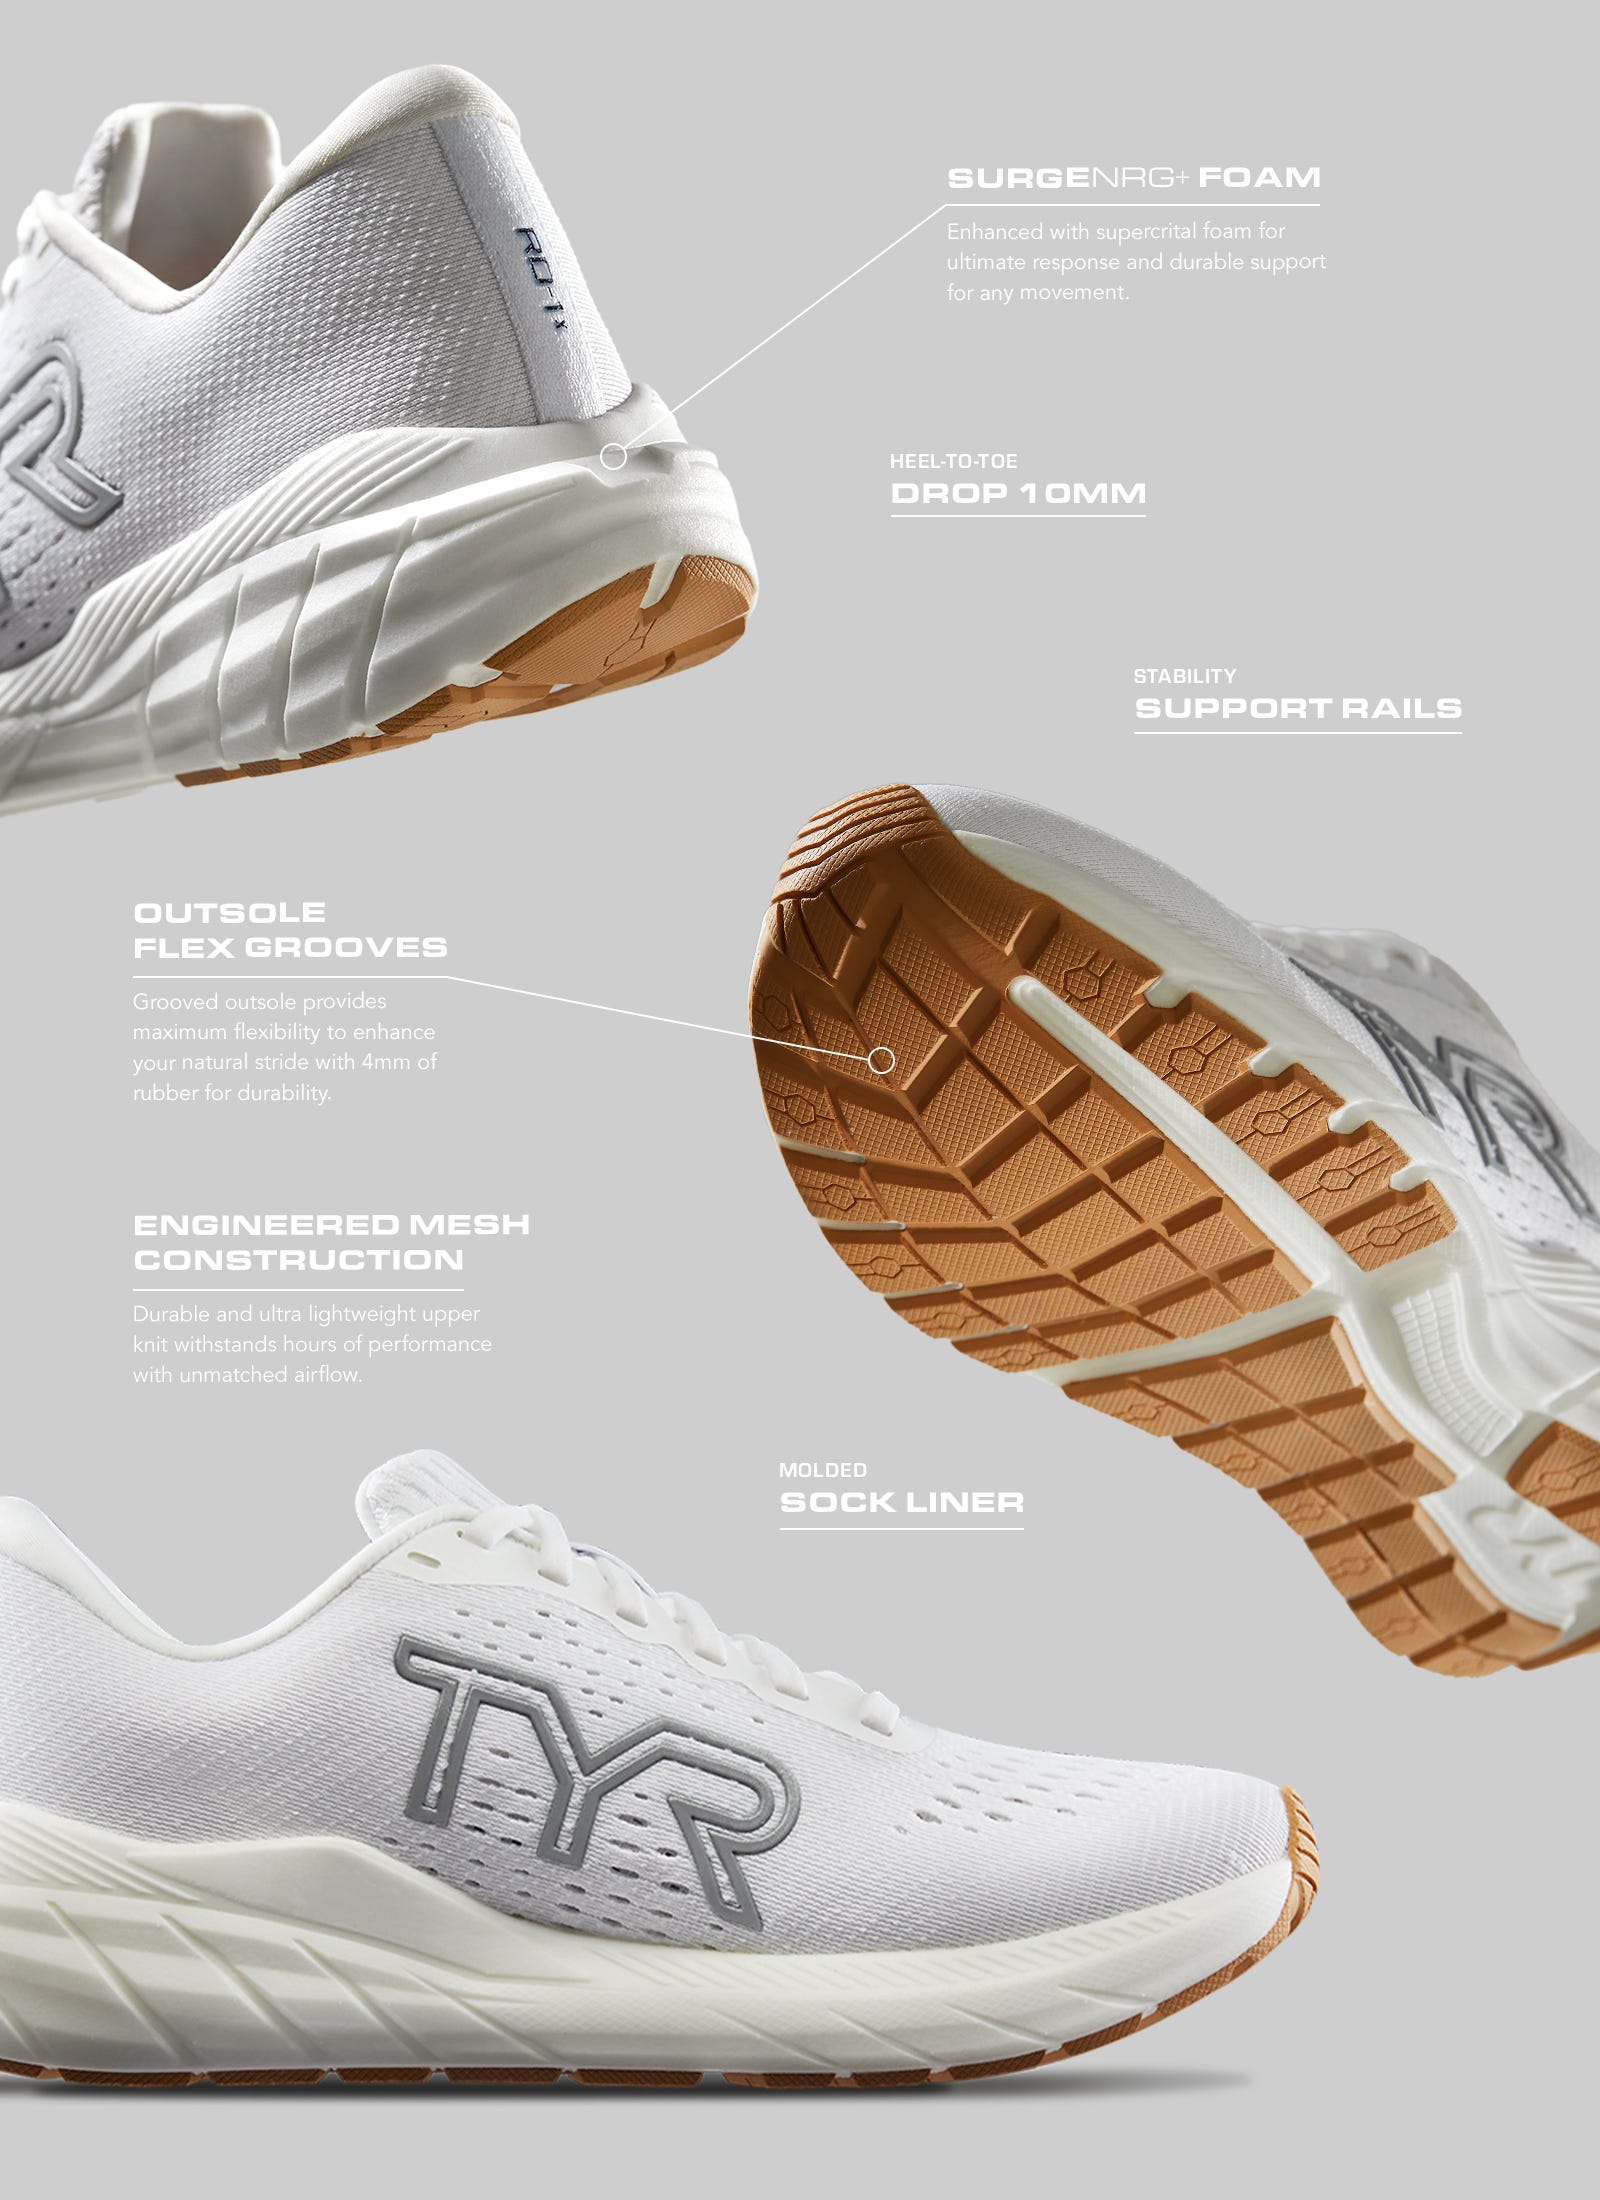 SURGENRG+ FOAM Enhanced with supercritical foam for ultimate response and durable support for any movement. HEEL-TO-TOE DROP 10MM STABILITY SUPPORT RAILS" "OUTSOLE FLEX GROOVES Grooved outsole provides maximum flexibility to enhance your natural stride 